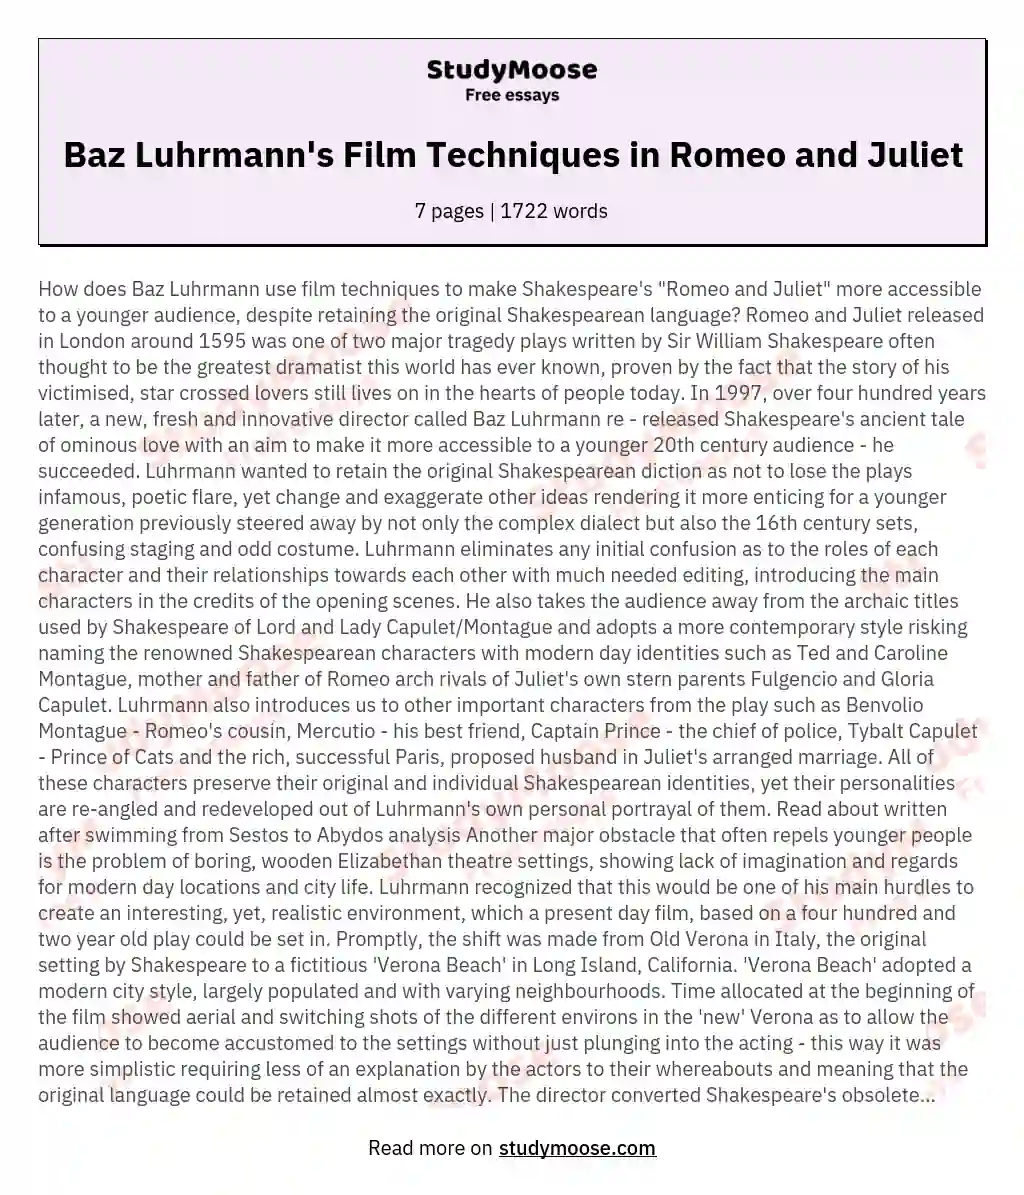 How does Baz Luhrmann use film techniques to make Shakespeare's "Romeo and Juliet"?